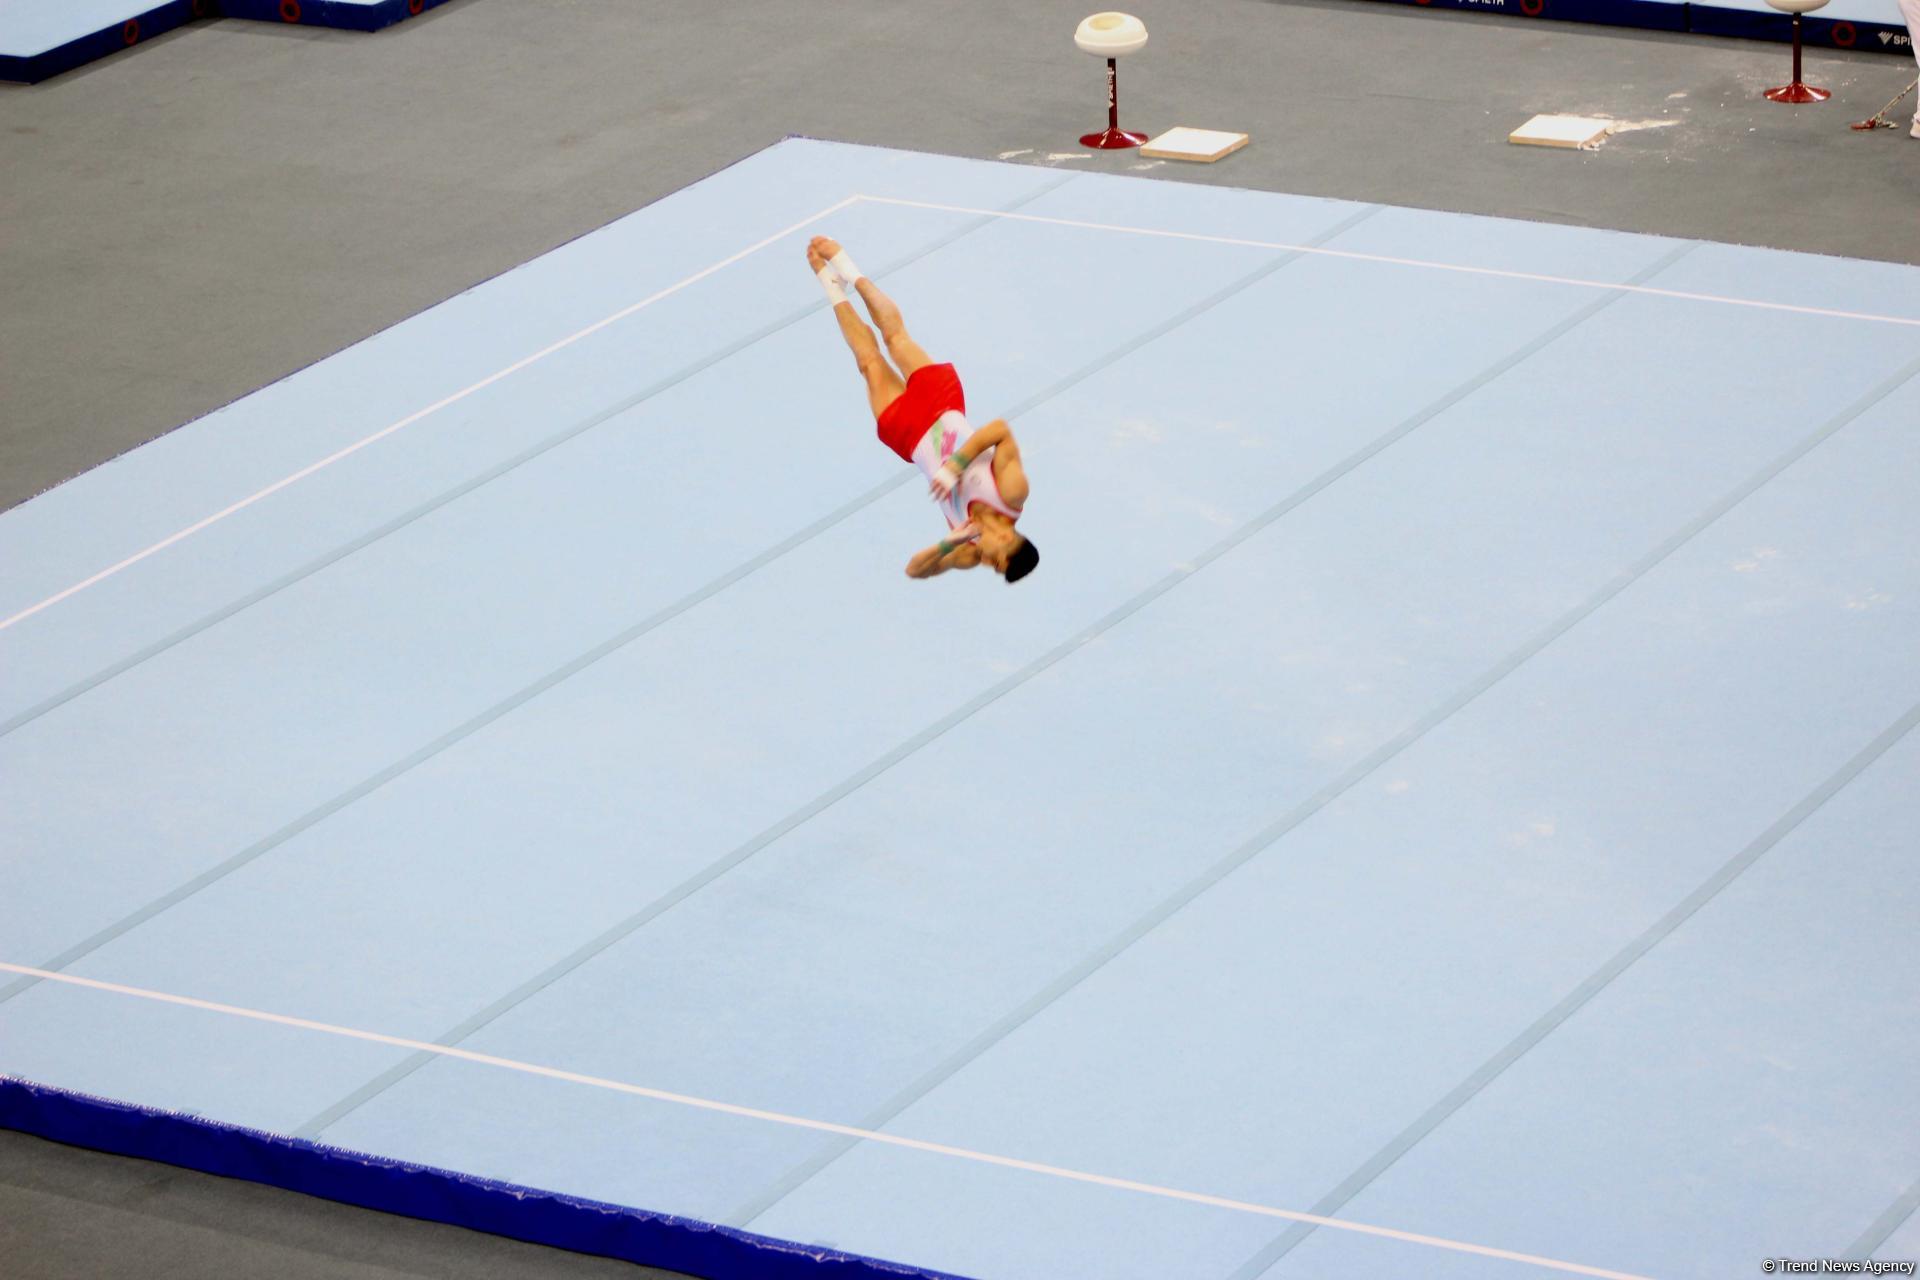 Female Finalists of FIG World Cup in artistic gymnastics in uneven bars in Baku defined